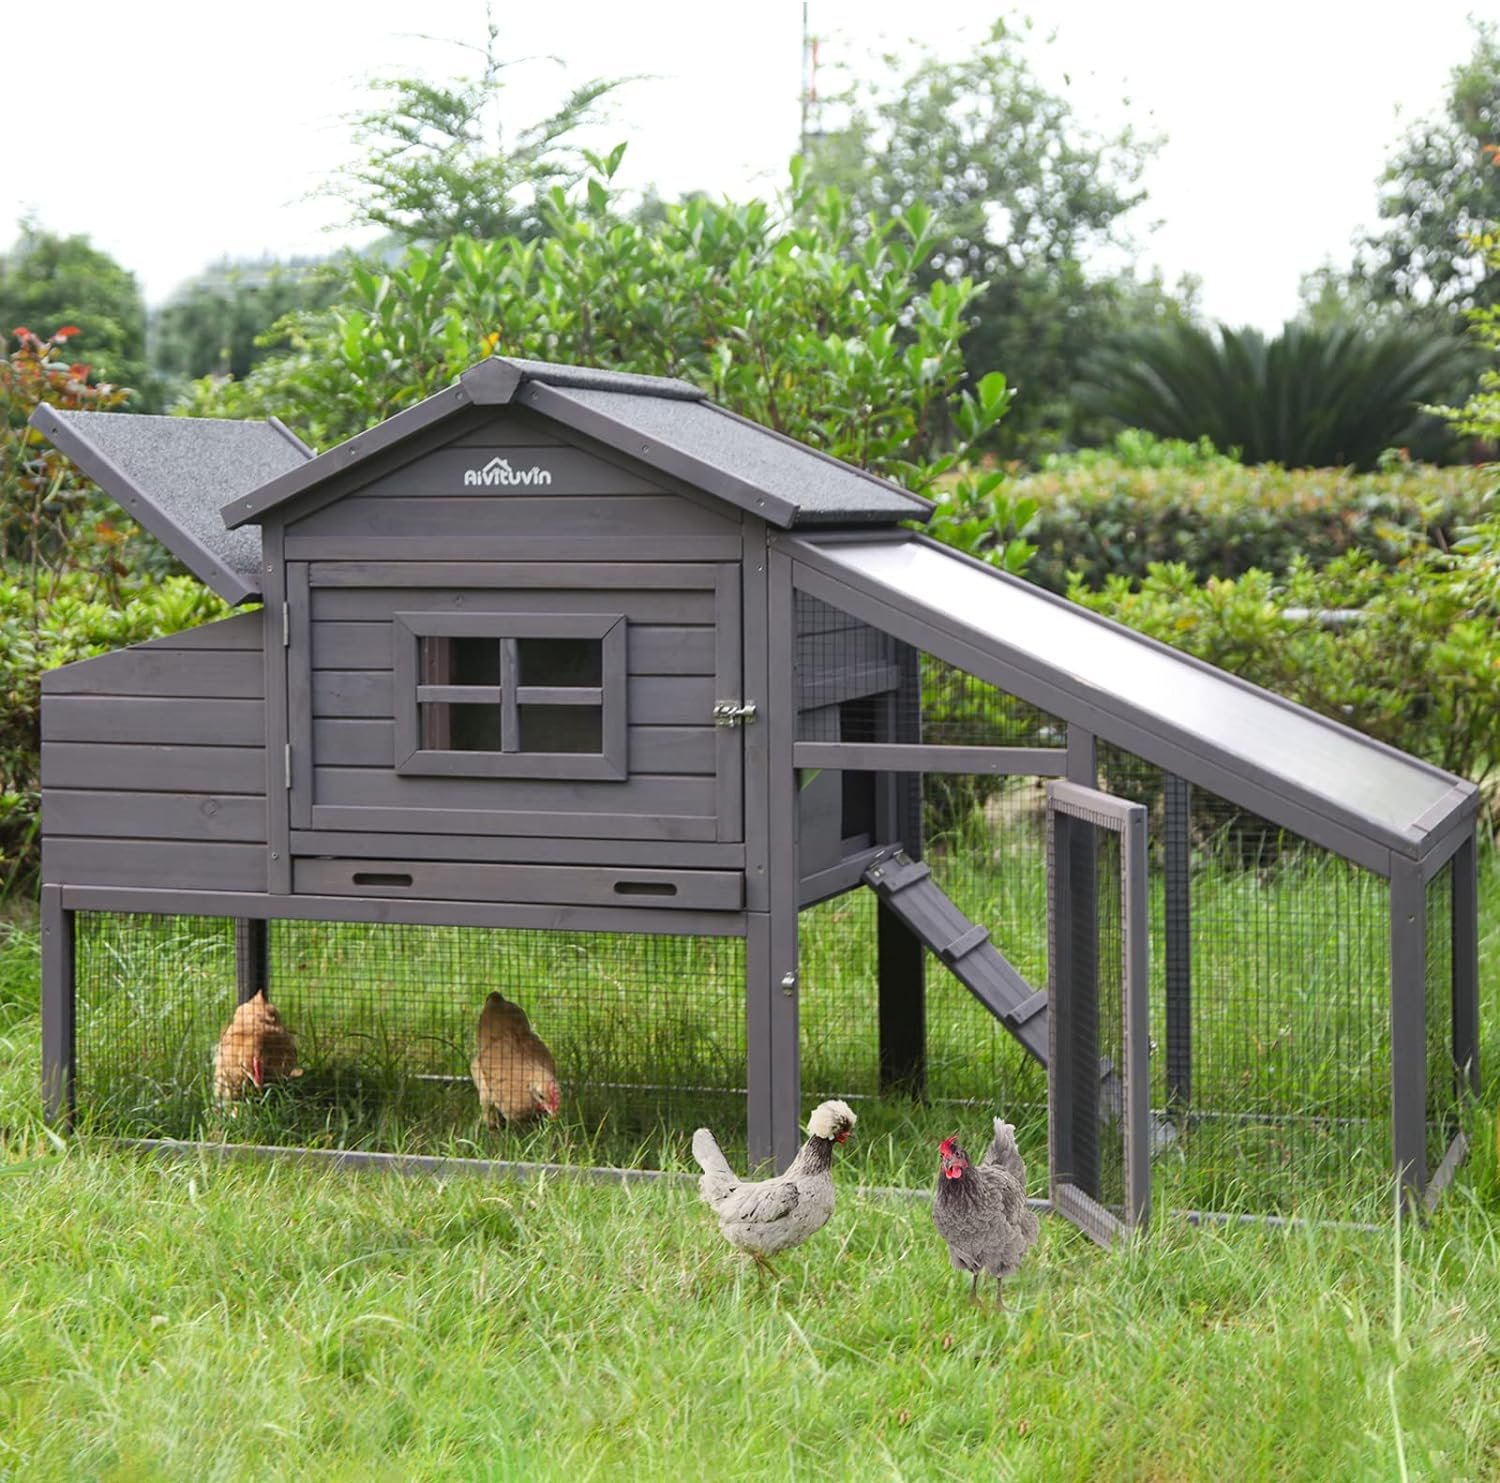 Aivituvin Wooden Chicken Coop, Large Outdoor Hen House with Nest Box Poultry Cage, Rabbit Hutch - Waterproof UV Panel 69in